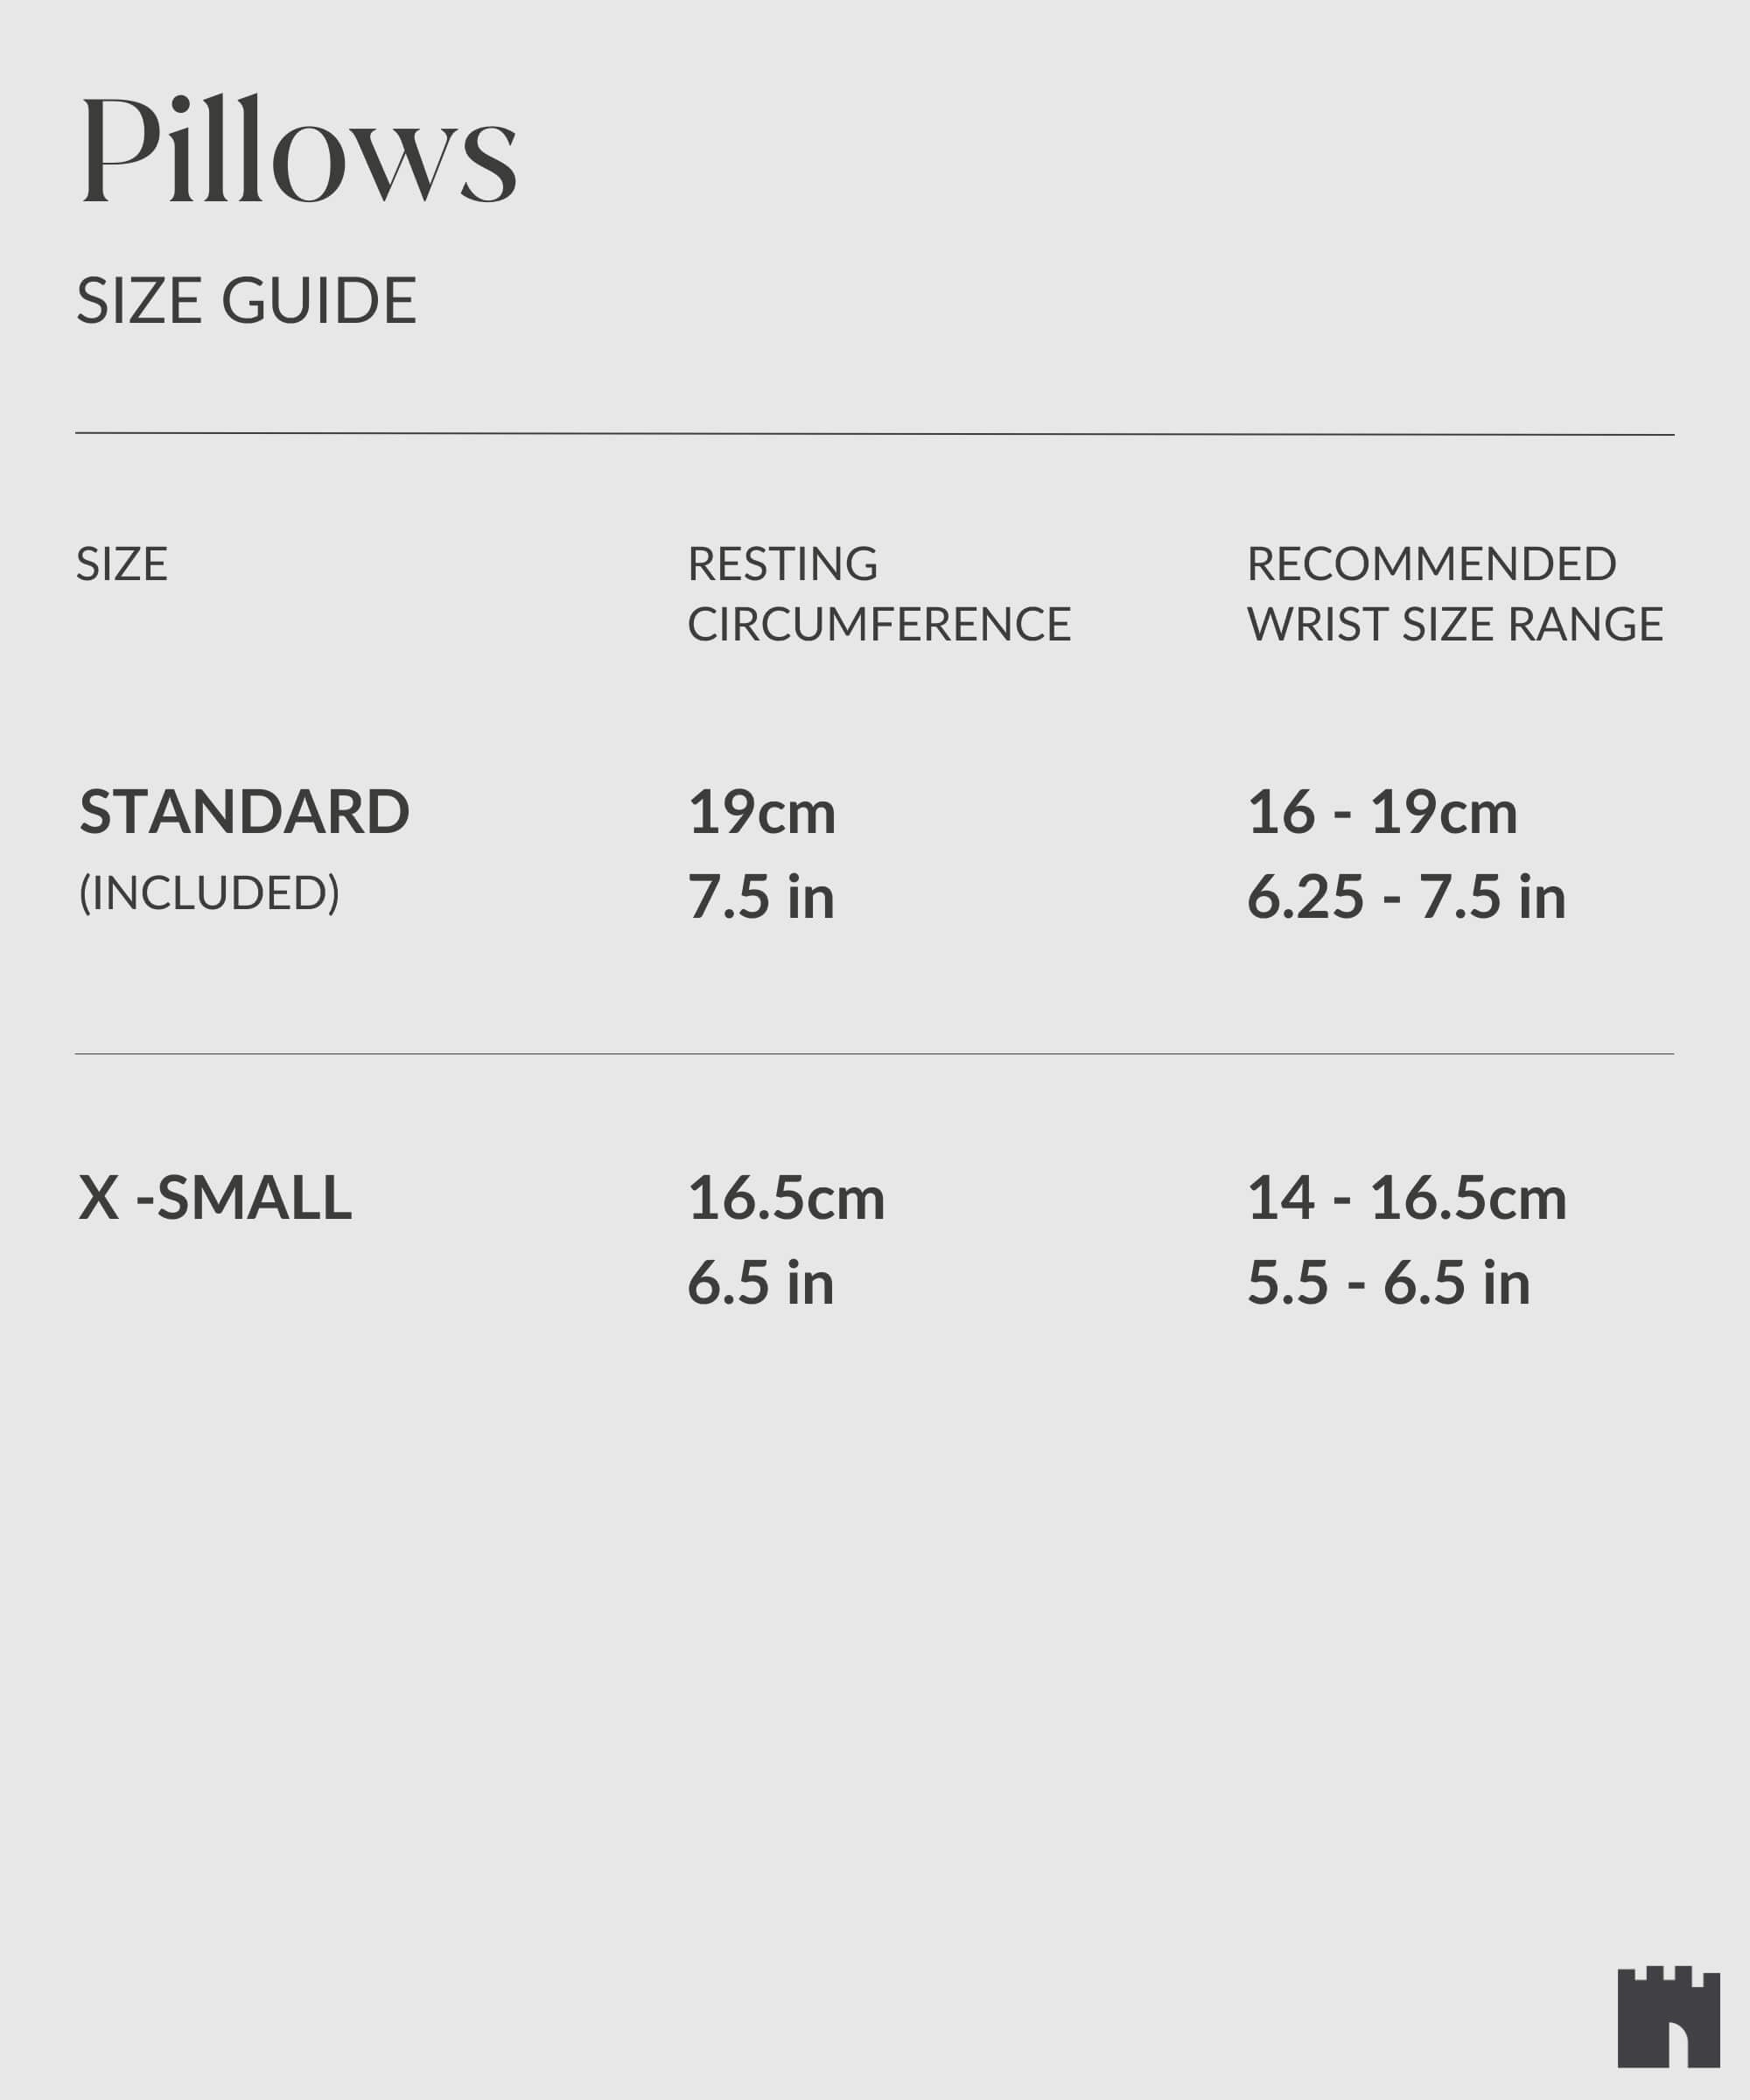 Pillow size chart showing standard and extra-small sizes with their resting circumference and recommended wrist size ranges for the TAWBURY Fraser 2 Watch Travel Case - Black range.